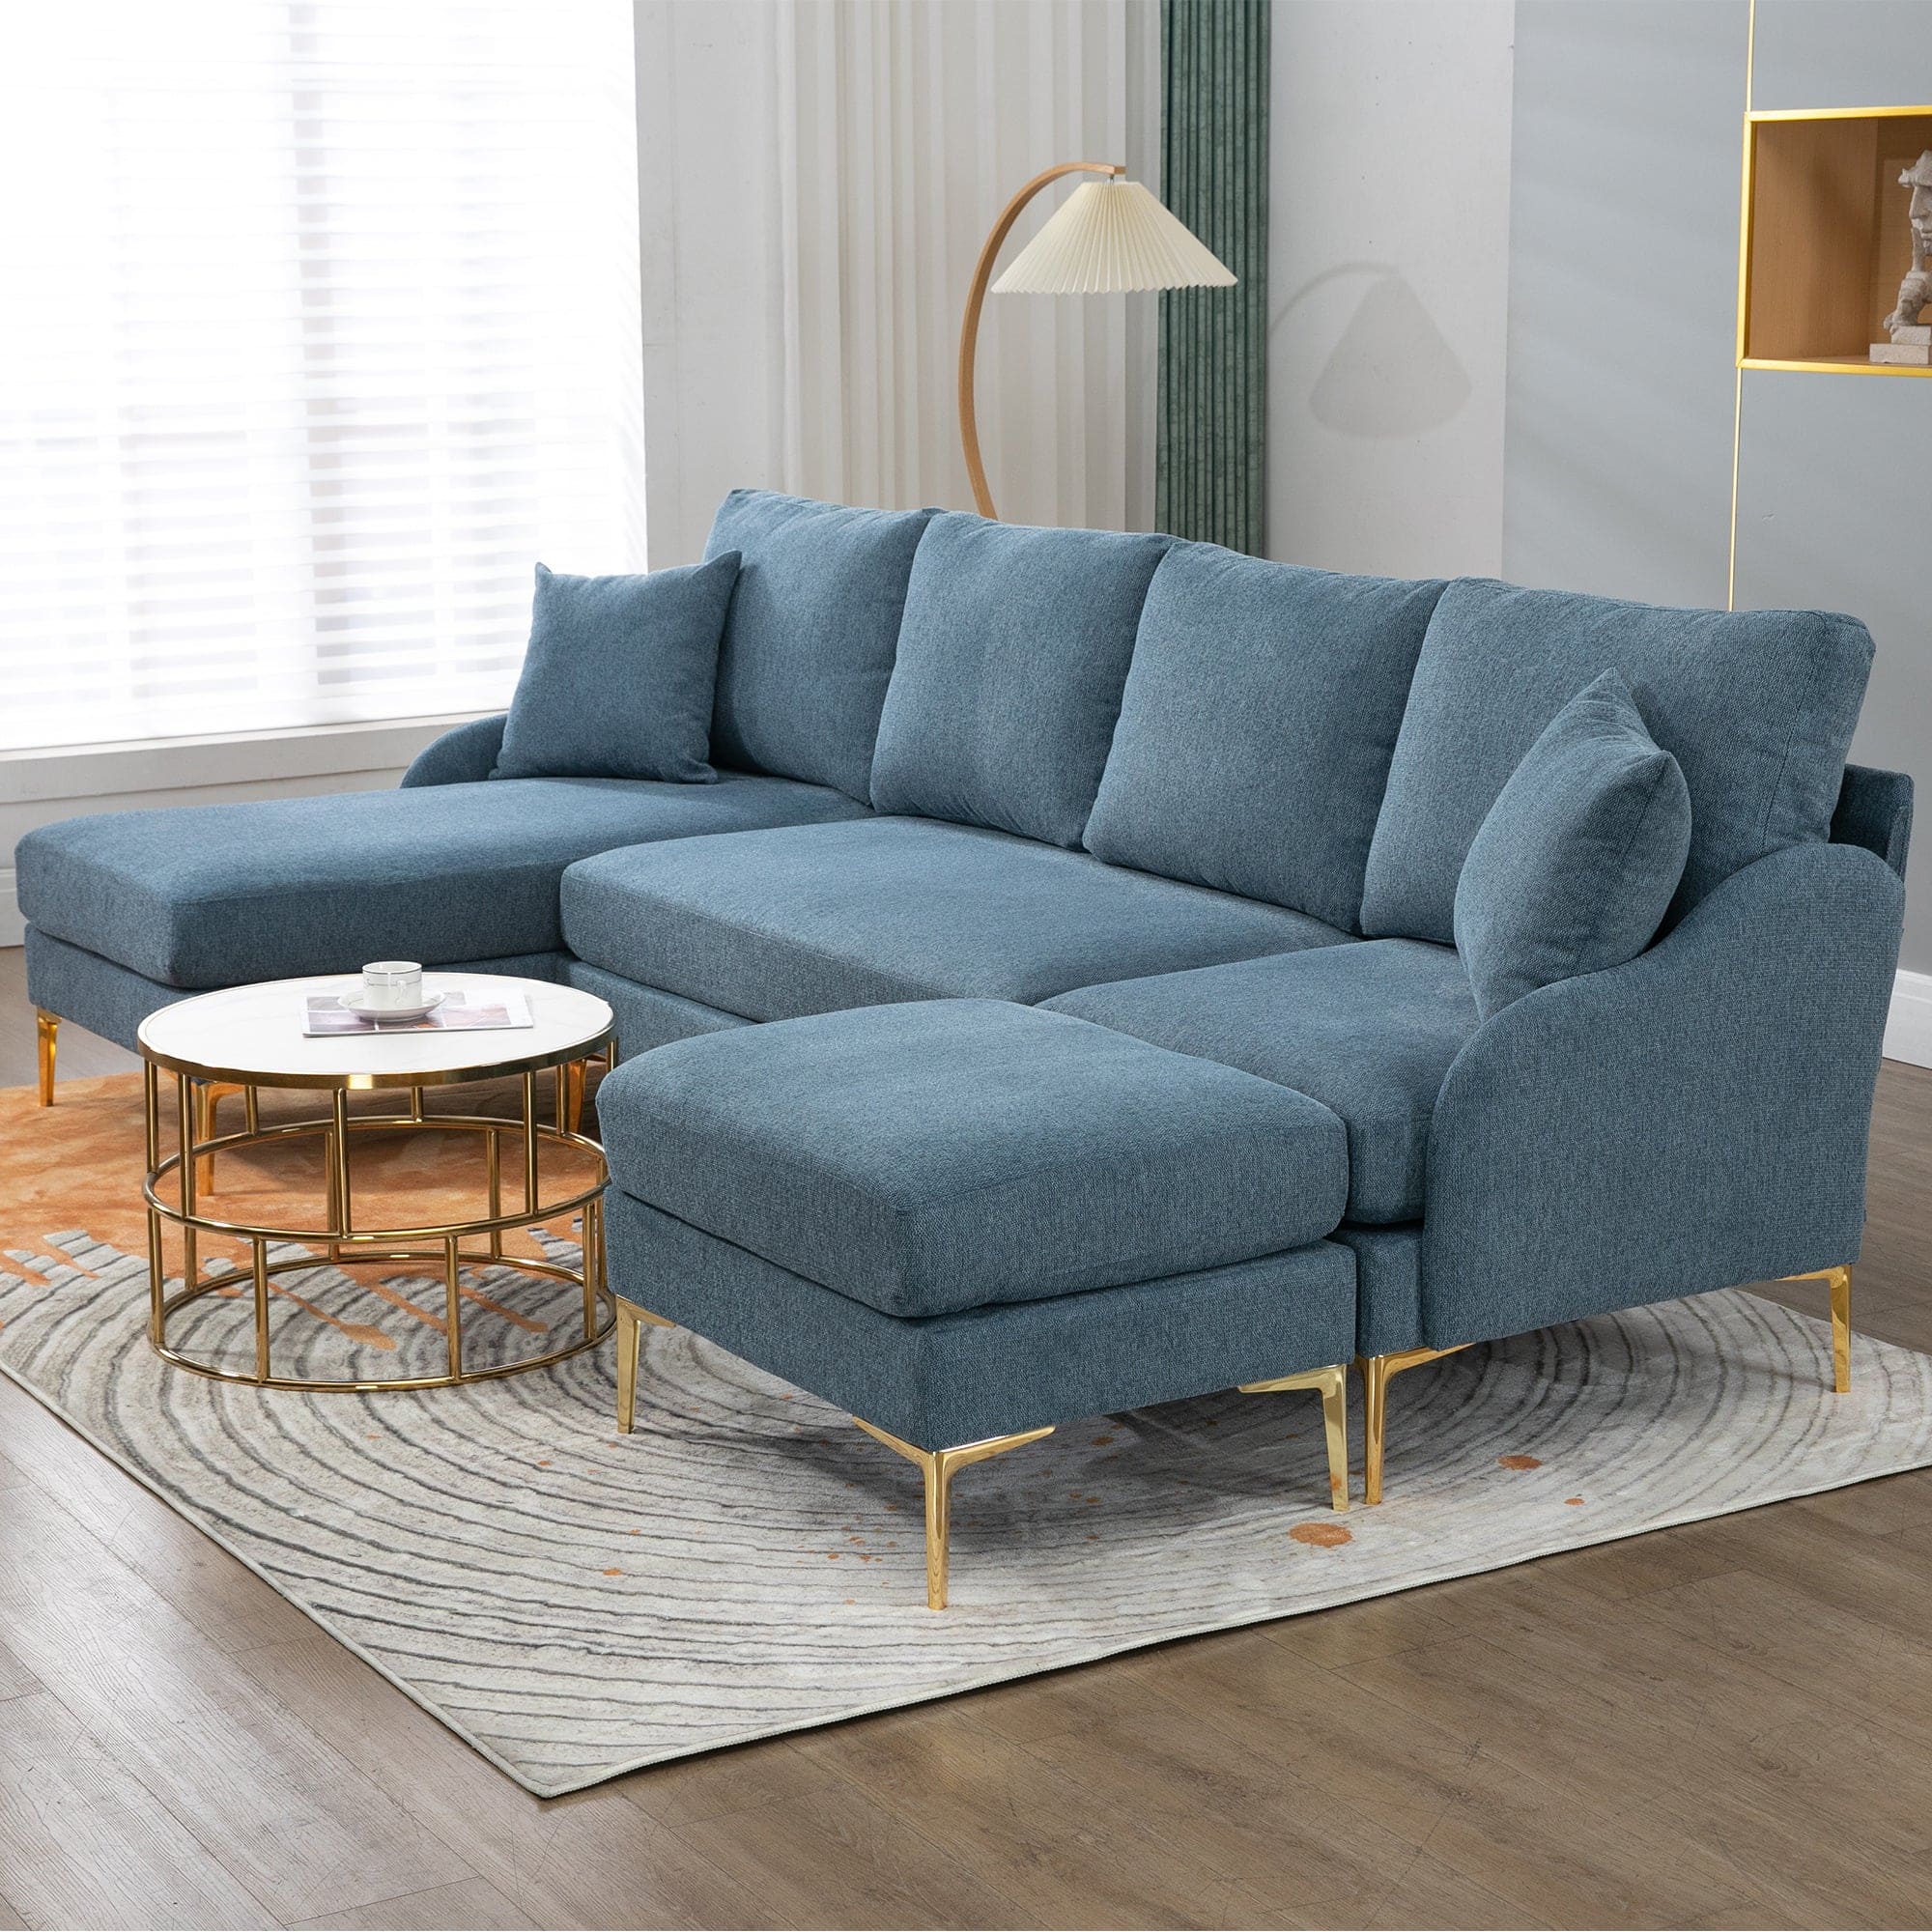 110'' Wide Reversible Left or Right Chaise of Sectional Sofa U-Shape Convertible Sofa Couch 4-Seat Couch with Chaise Lounge Upholstered for Living Room, Apartment, Office, Blue Polyester Blend